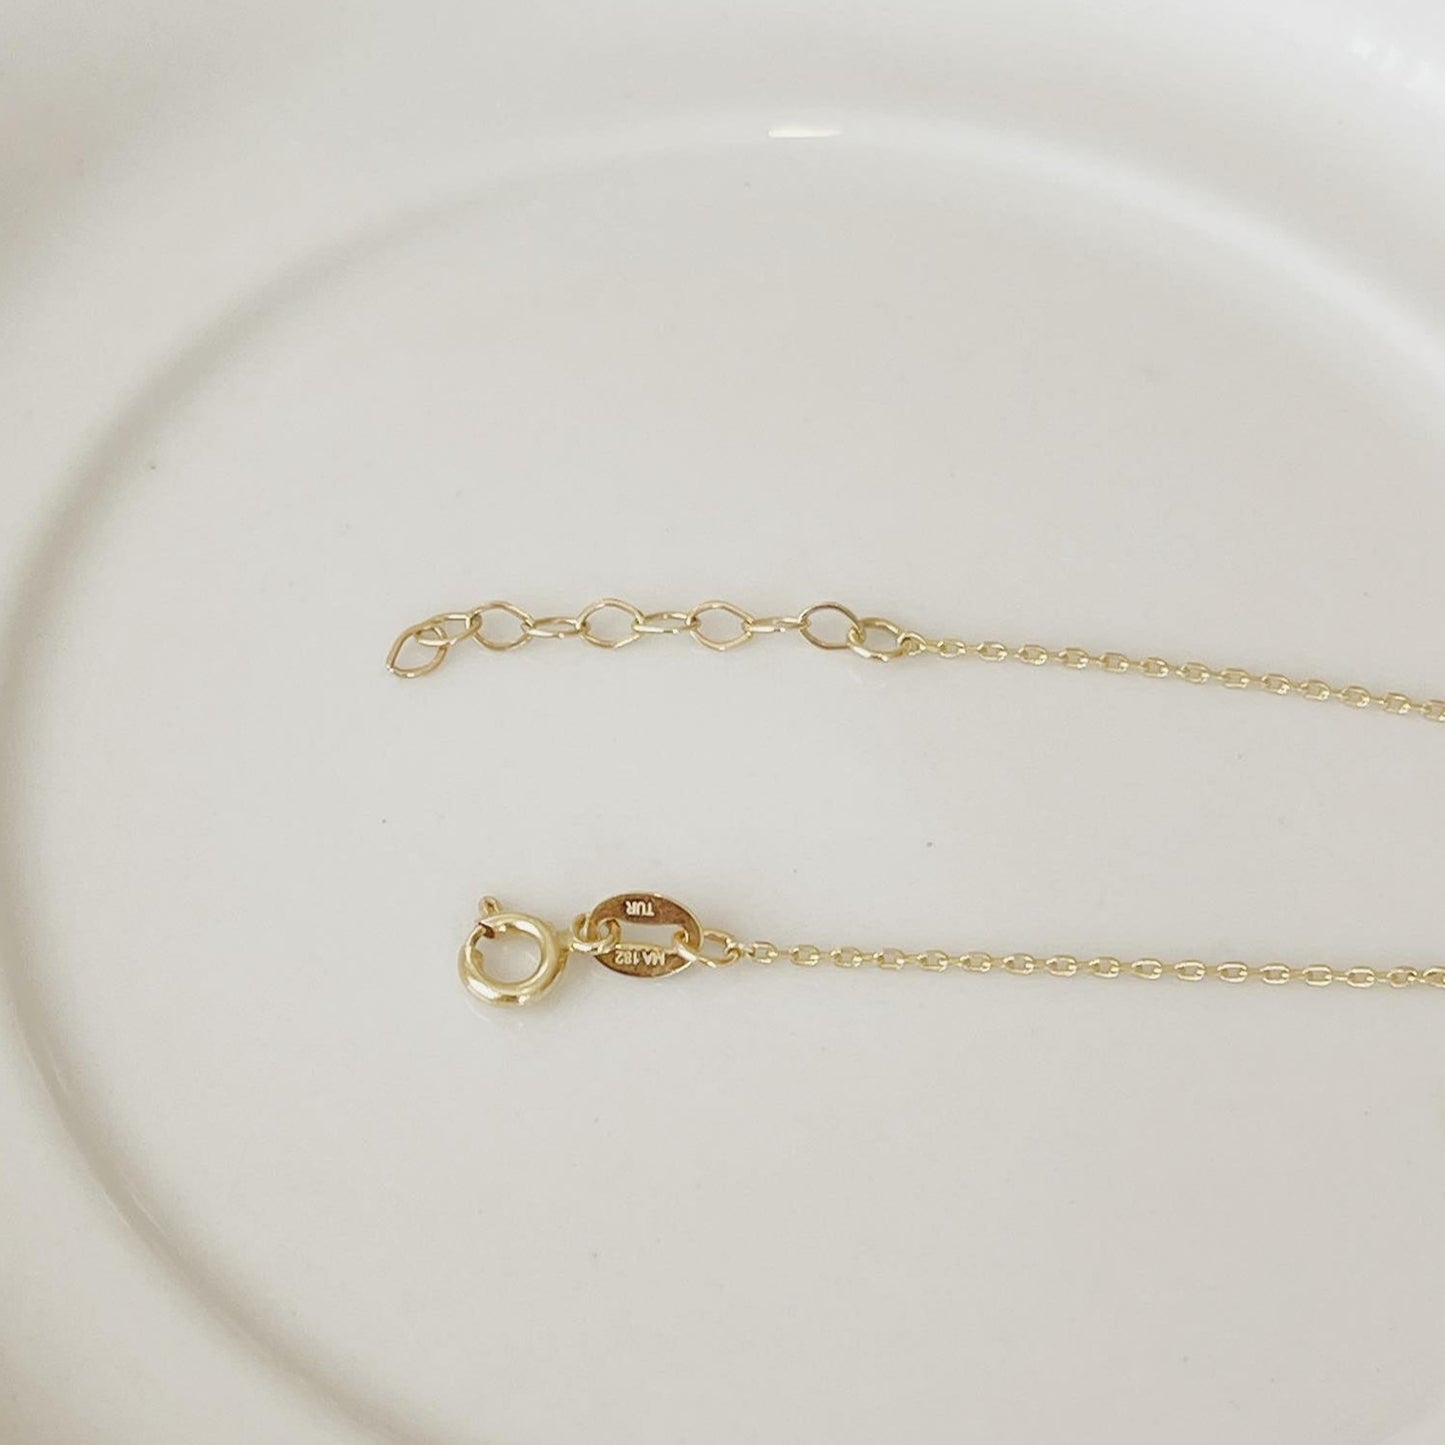 Simple, delicate, and very noble. This 10K Gold Double Heart Pendant Chain is the perfect accessory for everyday wear. It can be worn with any outfit, to work or play. 